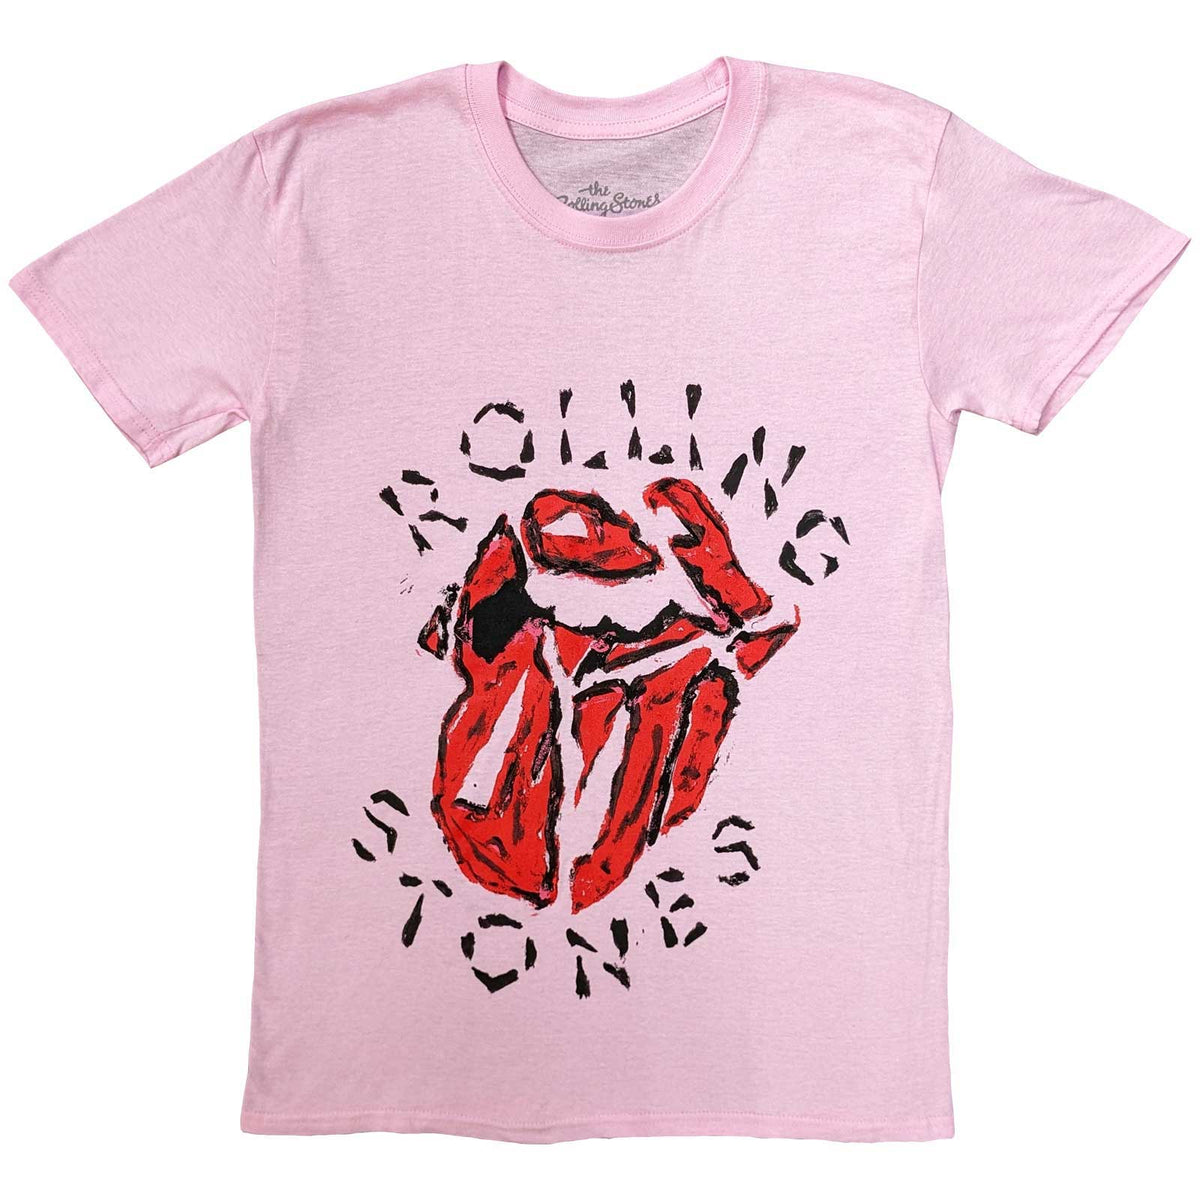 The Rolling Stones Unisex T-Shirt - Hackney Diamonds Painted Tongue Pink - Official Licensed Design